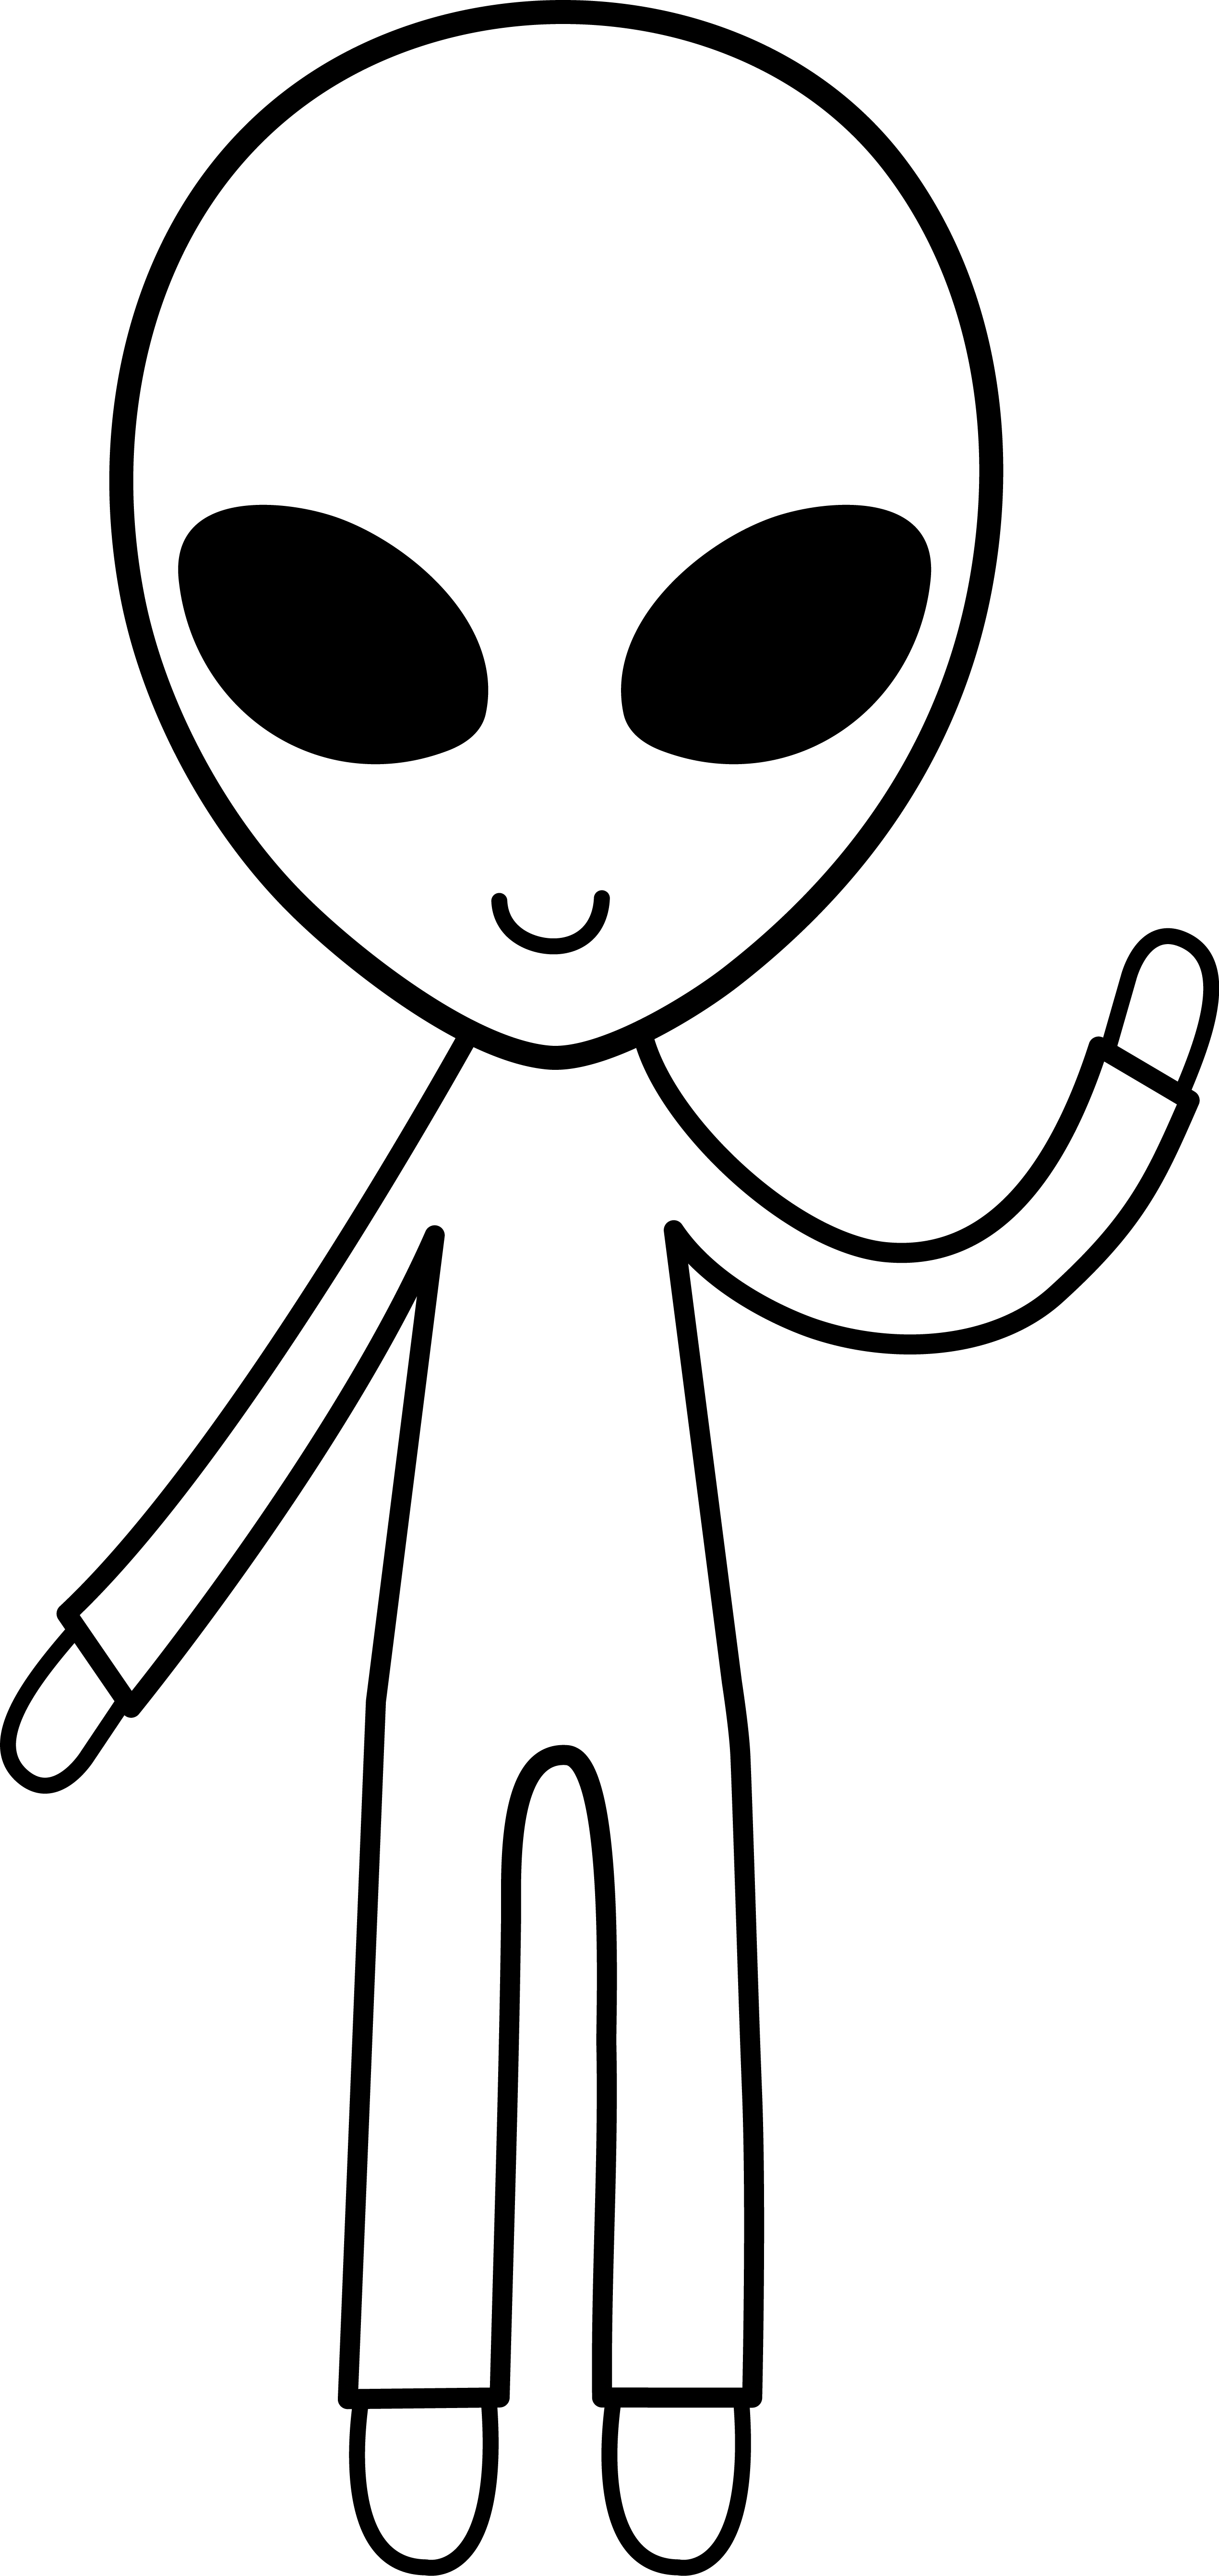 Cute Alien Drawing Images  Pictures - Becuo